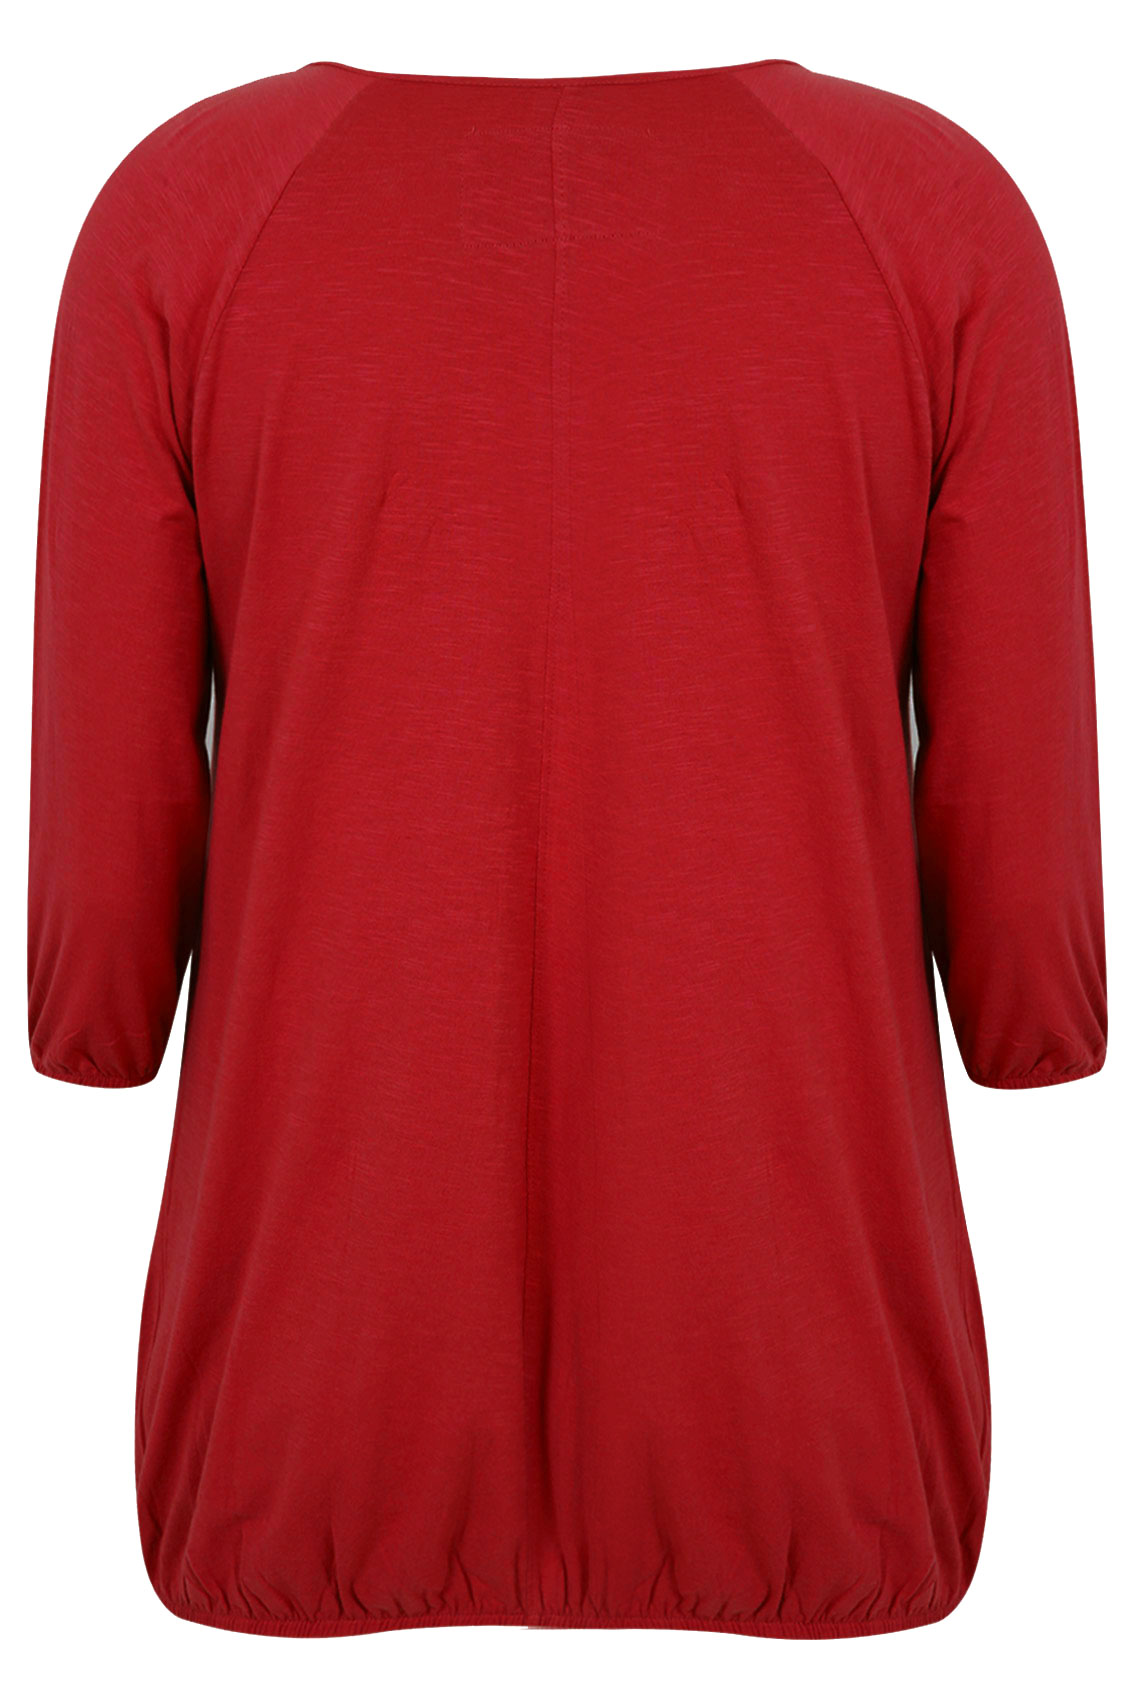 Red 3/4 Sleeve Top With Bubble Hem Plus Size 16 to 32